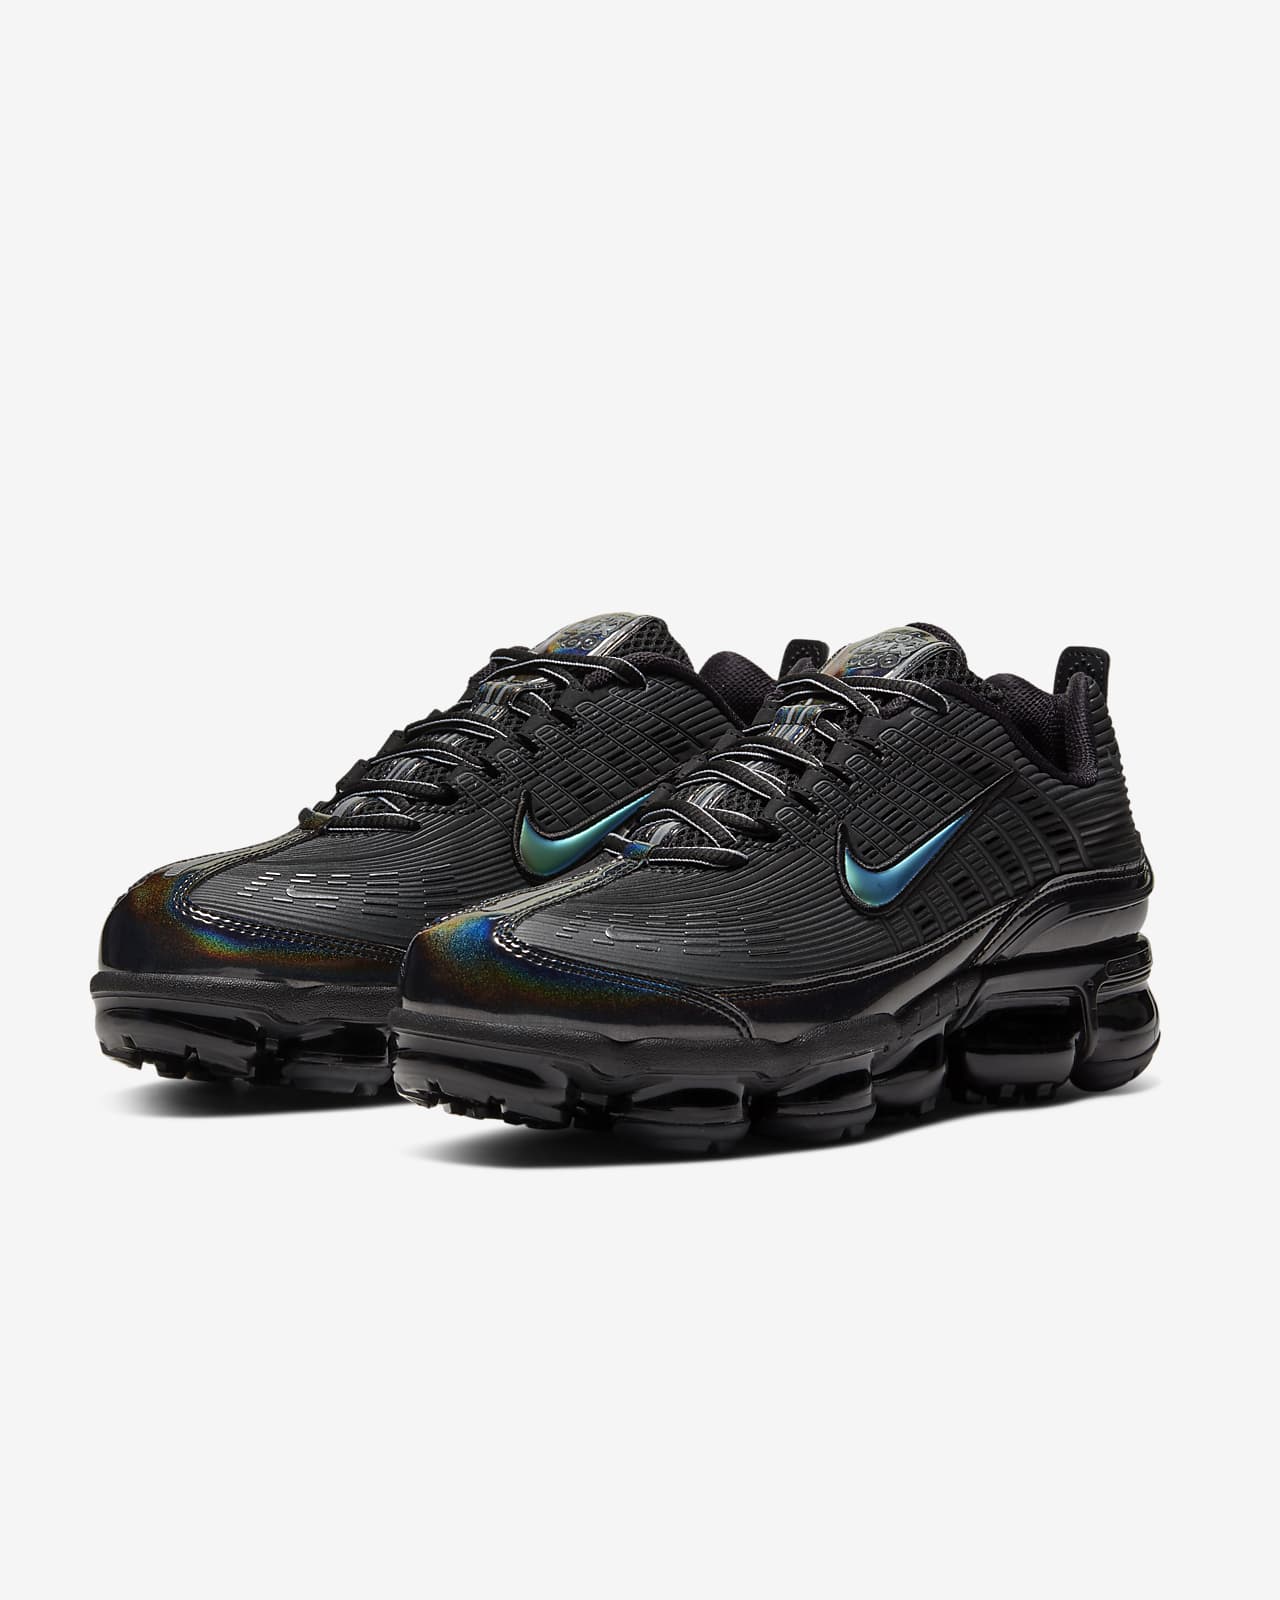 air vapormax 360 trainers